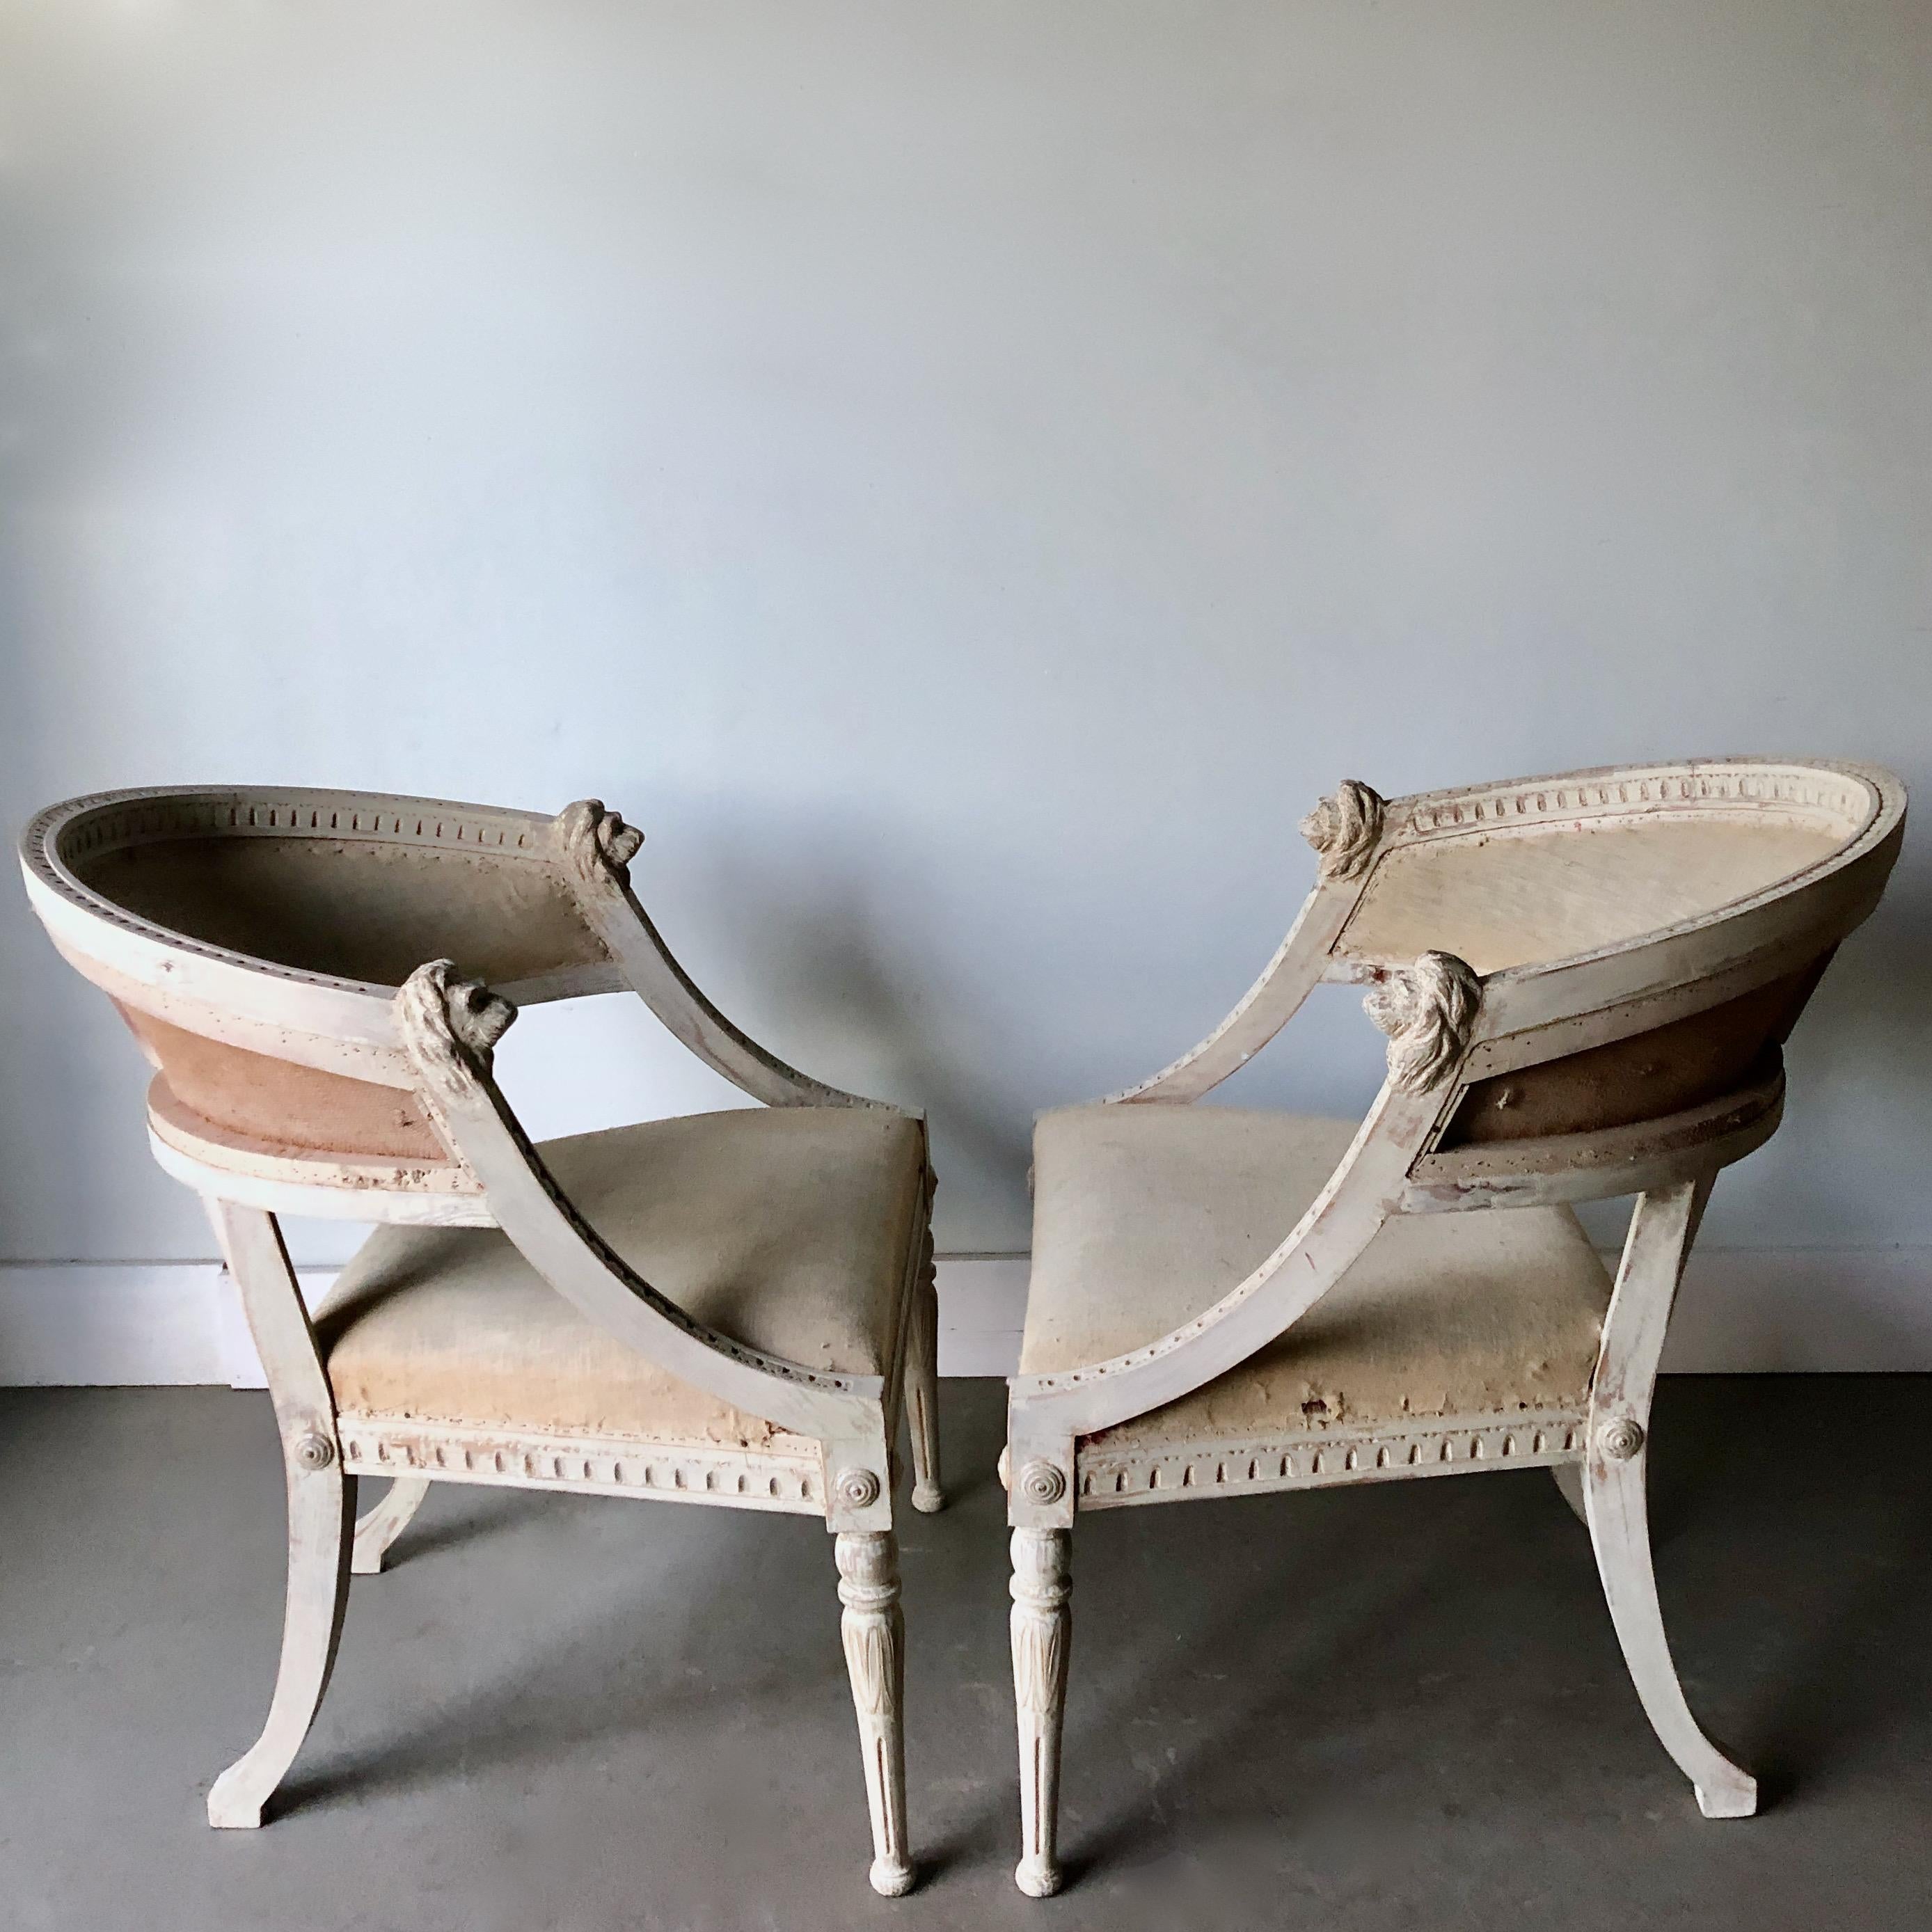 Hand-Carved Pair of 19th Century Swedish Barrel Back Chairs